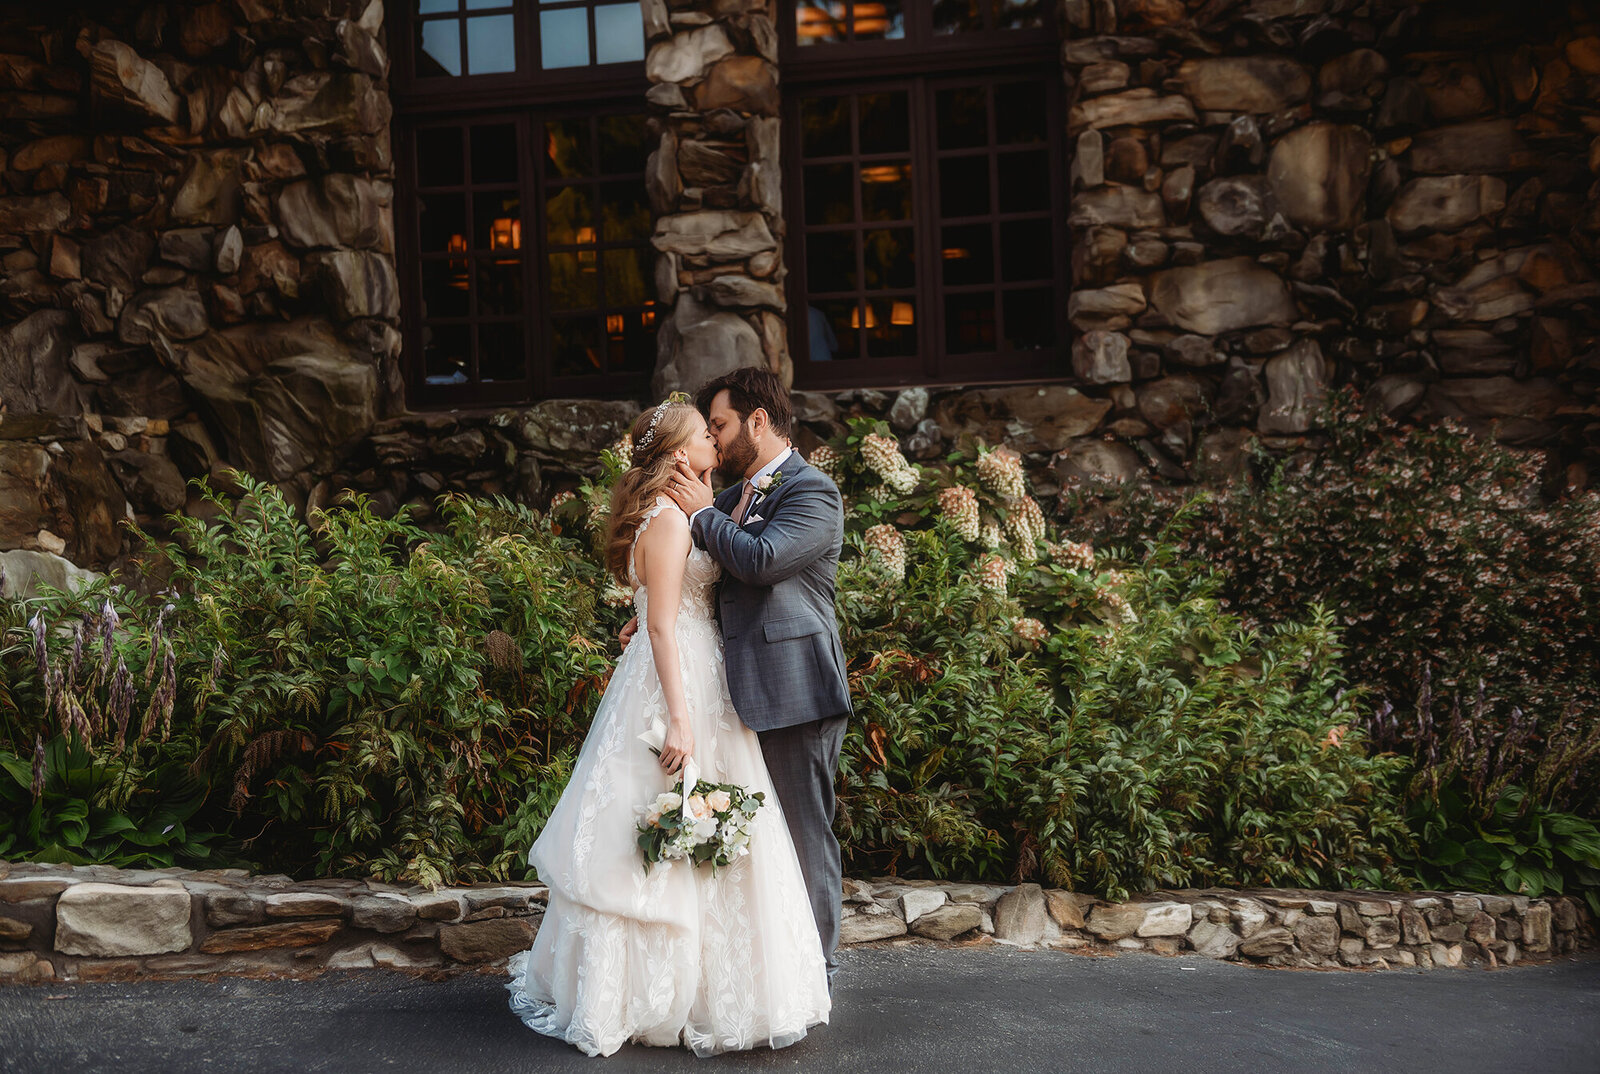 Bride and Groom embrace for Newlywed Portraits after their Micro Wedding Ceremony at Grove Park Inn in Asheville, NC.